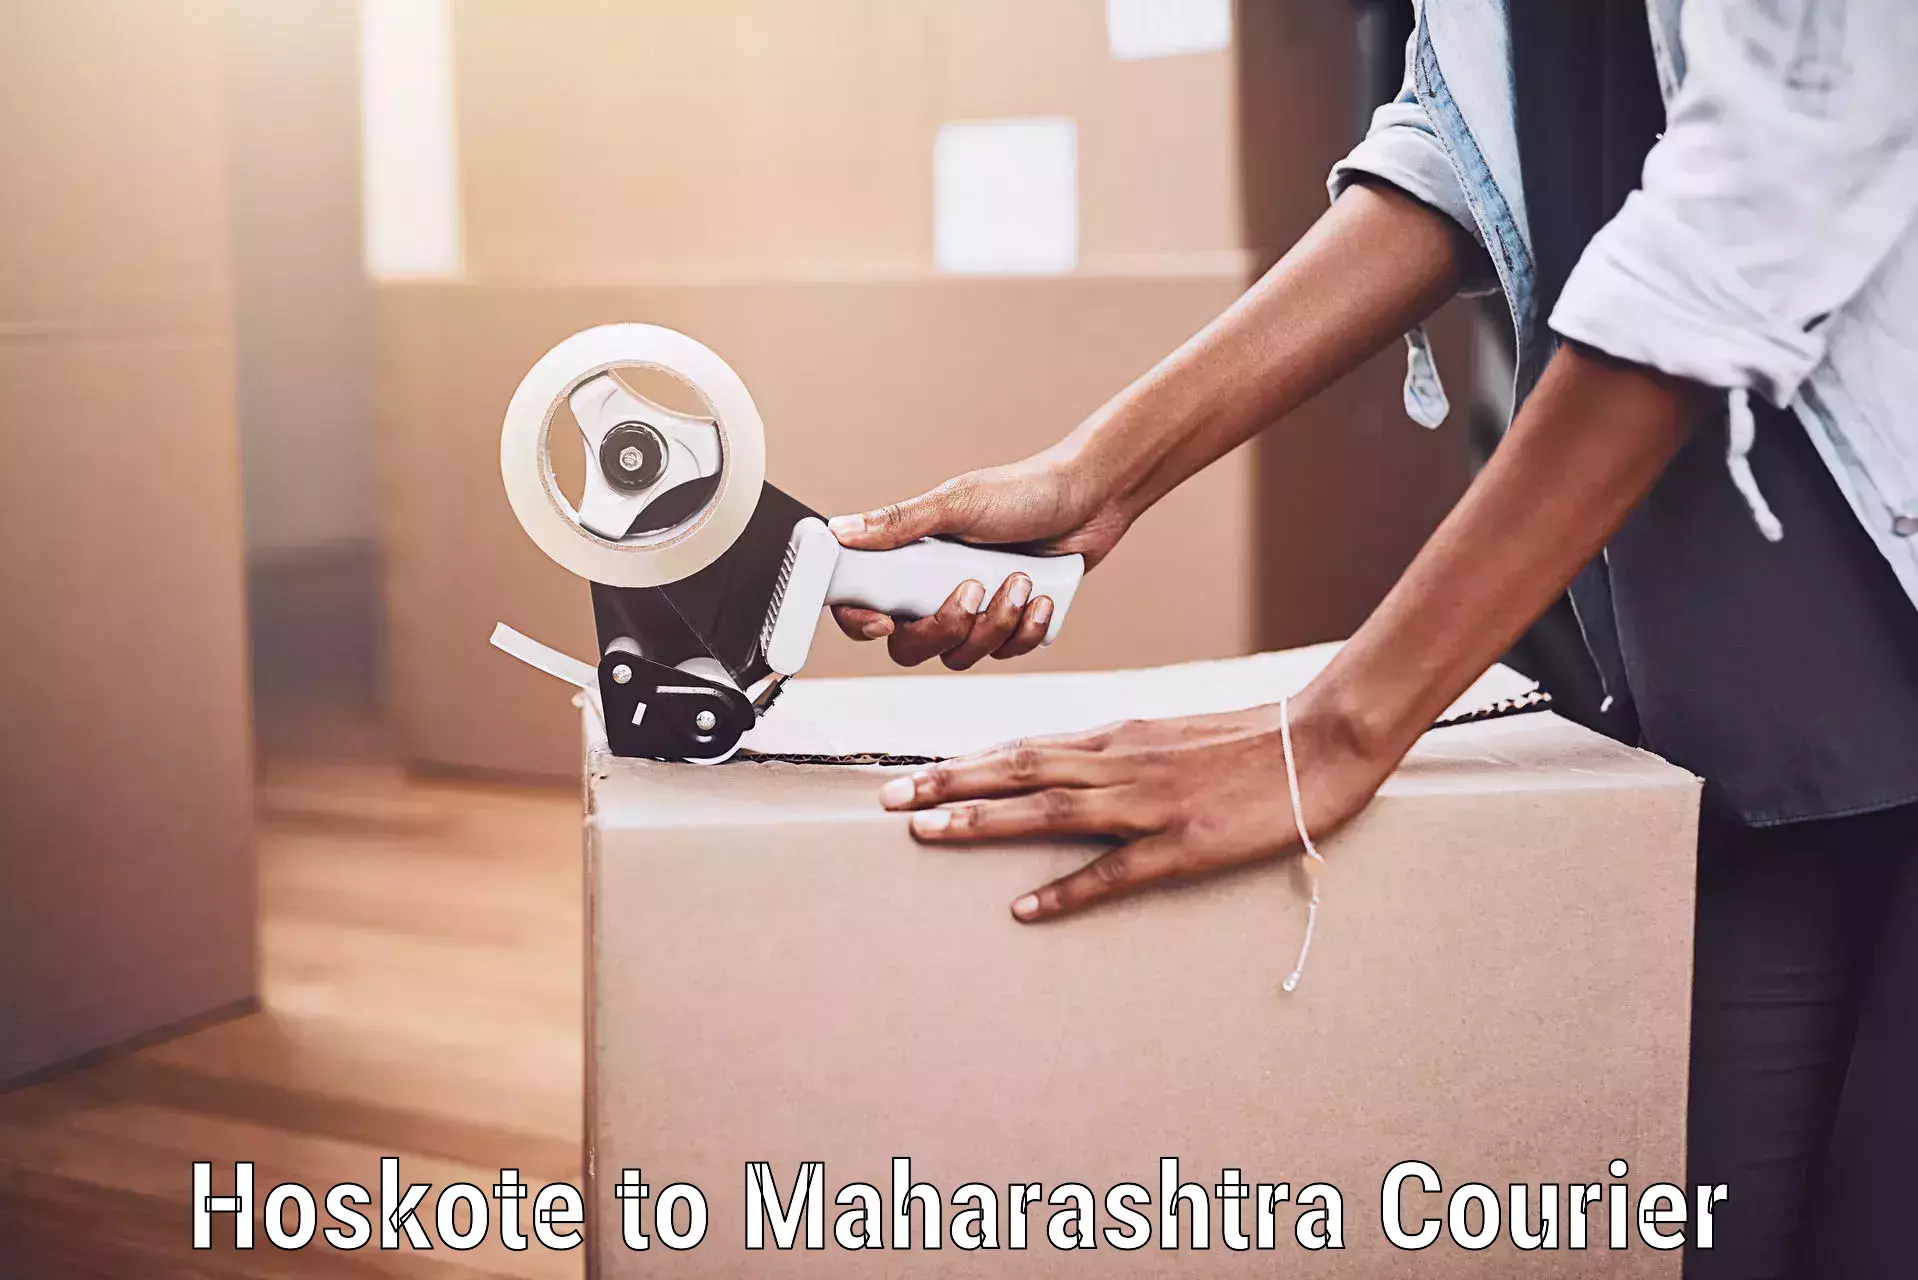 Instant baggage transport quote Hoskote to Maharashtra